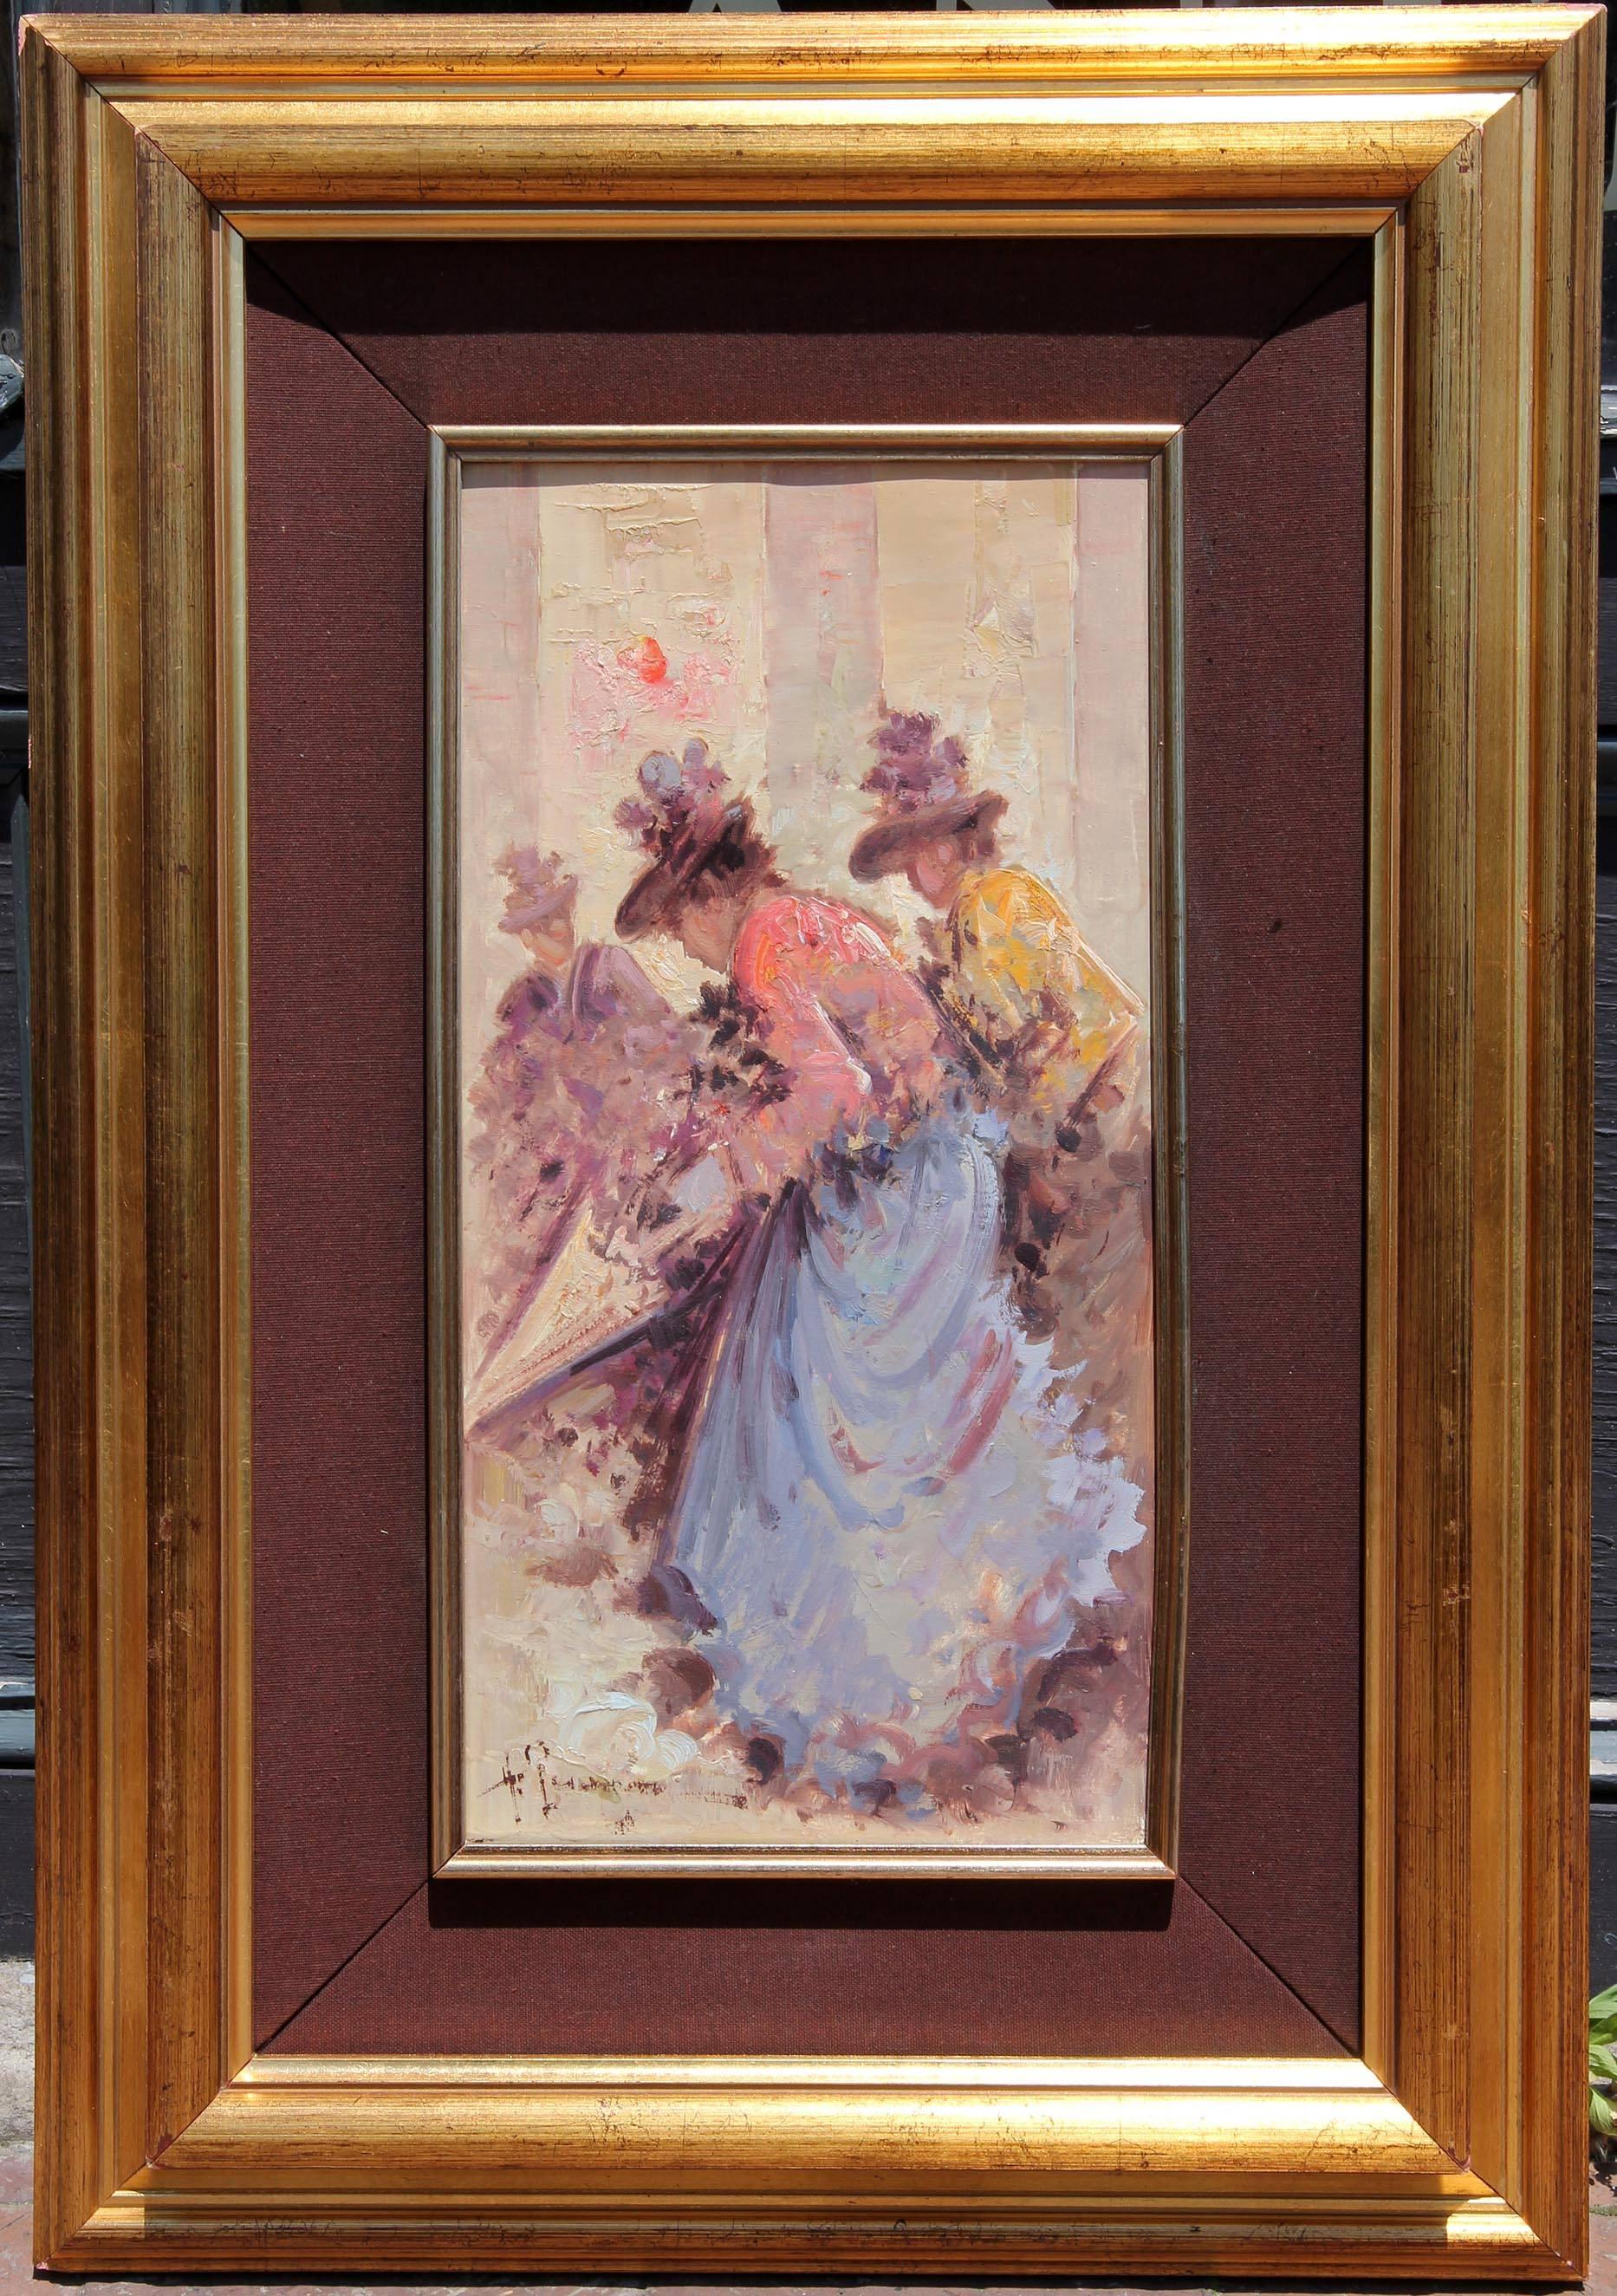 French impressionist paintings of women in floral bonnets. Painted in soft colors. Signed illegibly. Oil on canvas. In giltwood frame.